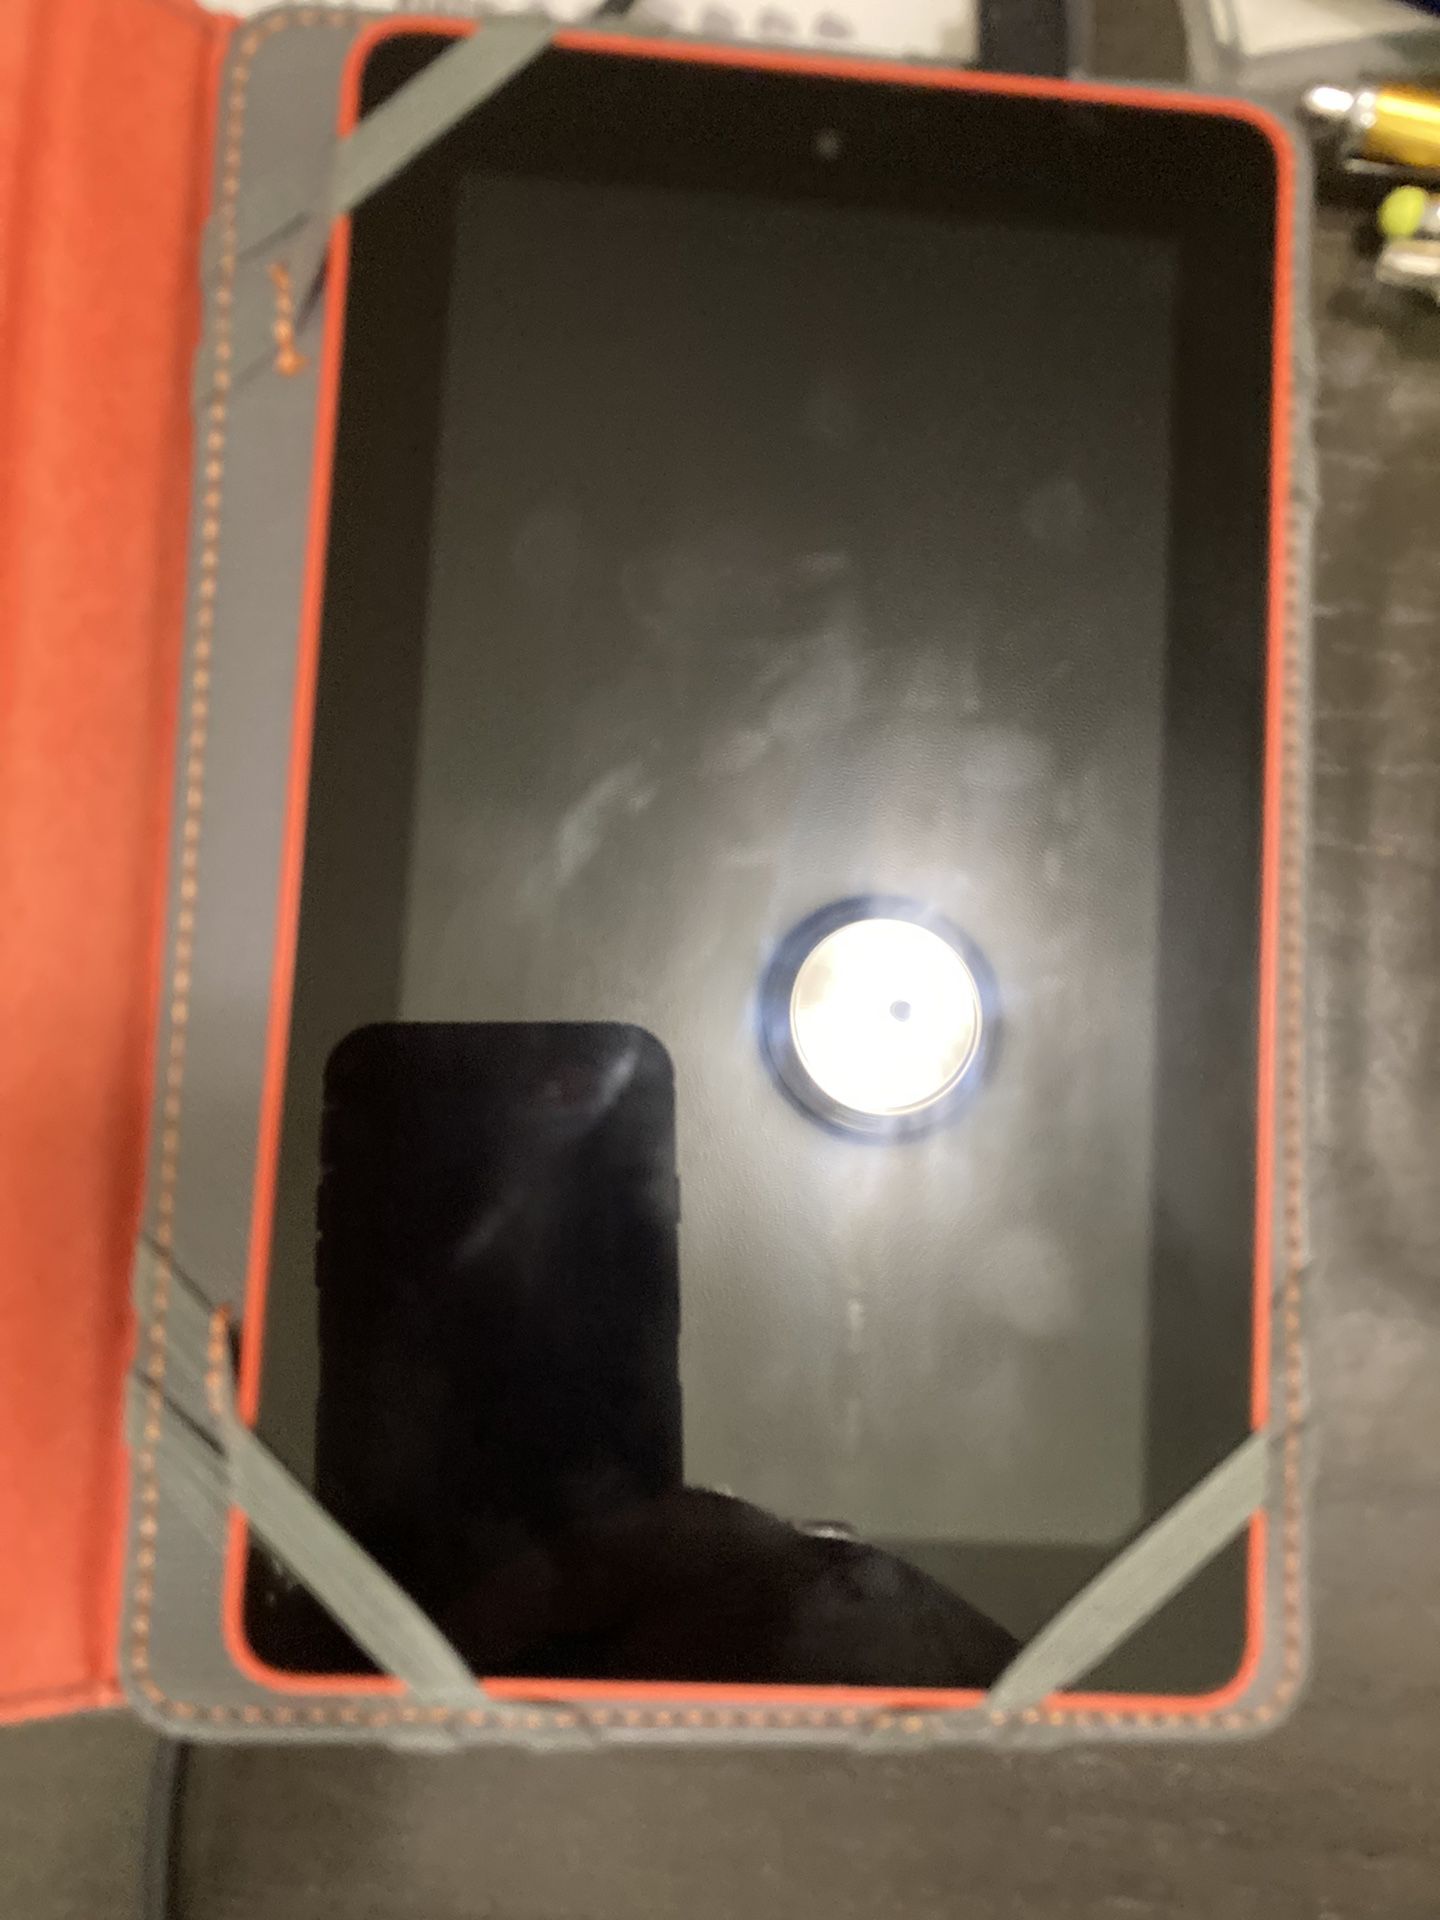 7 inch fire tablet